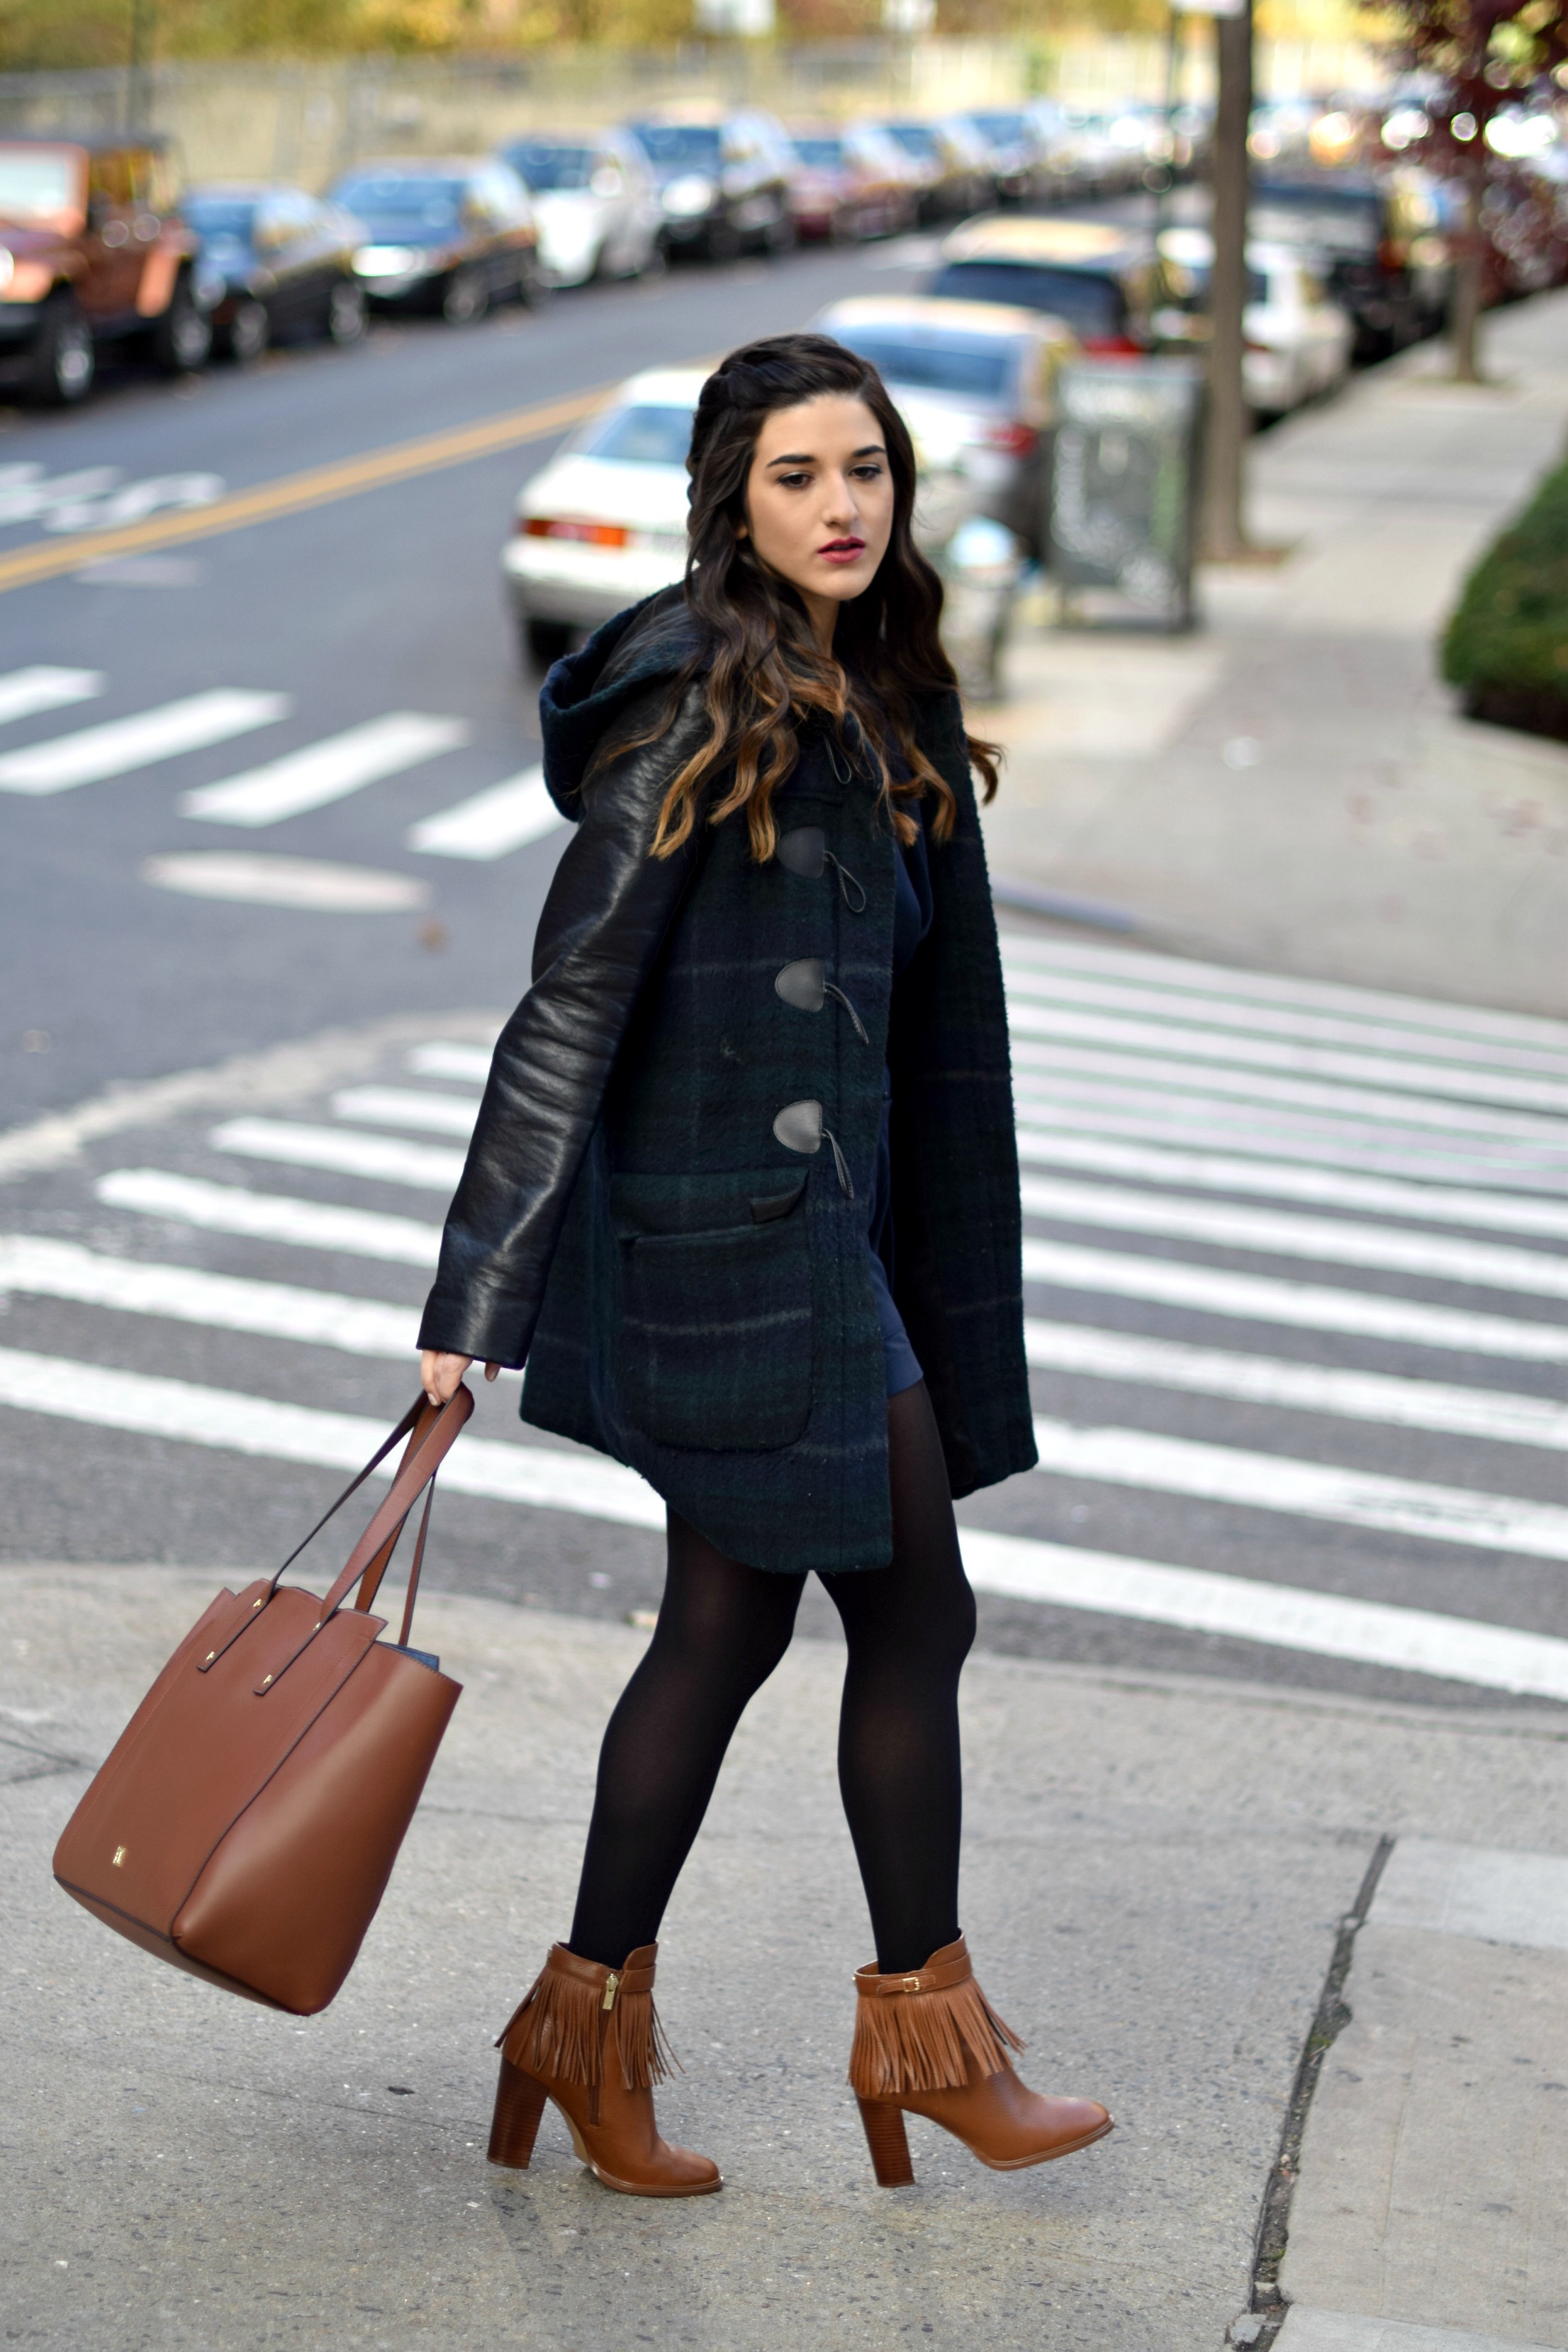 Navy Romper Fringe Booties Louboutins & Love Fashion Blog Esther Santer NYC Street Style Blogger Zara Plaid Coat Leather Sleeves Girl Women OOTD Outfit Soho Tote Ivanka Trump Accessories Shoes Boots Winter Black Tights Hair Braid Inspo Jewelry Rings.jpg